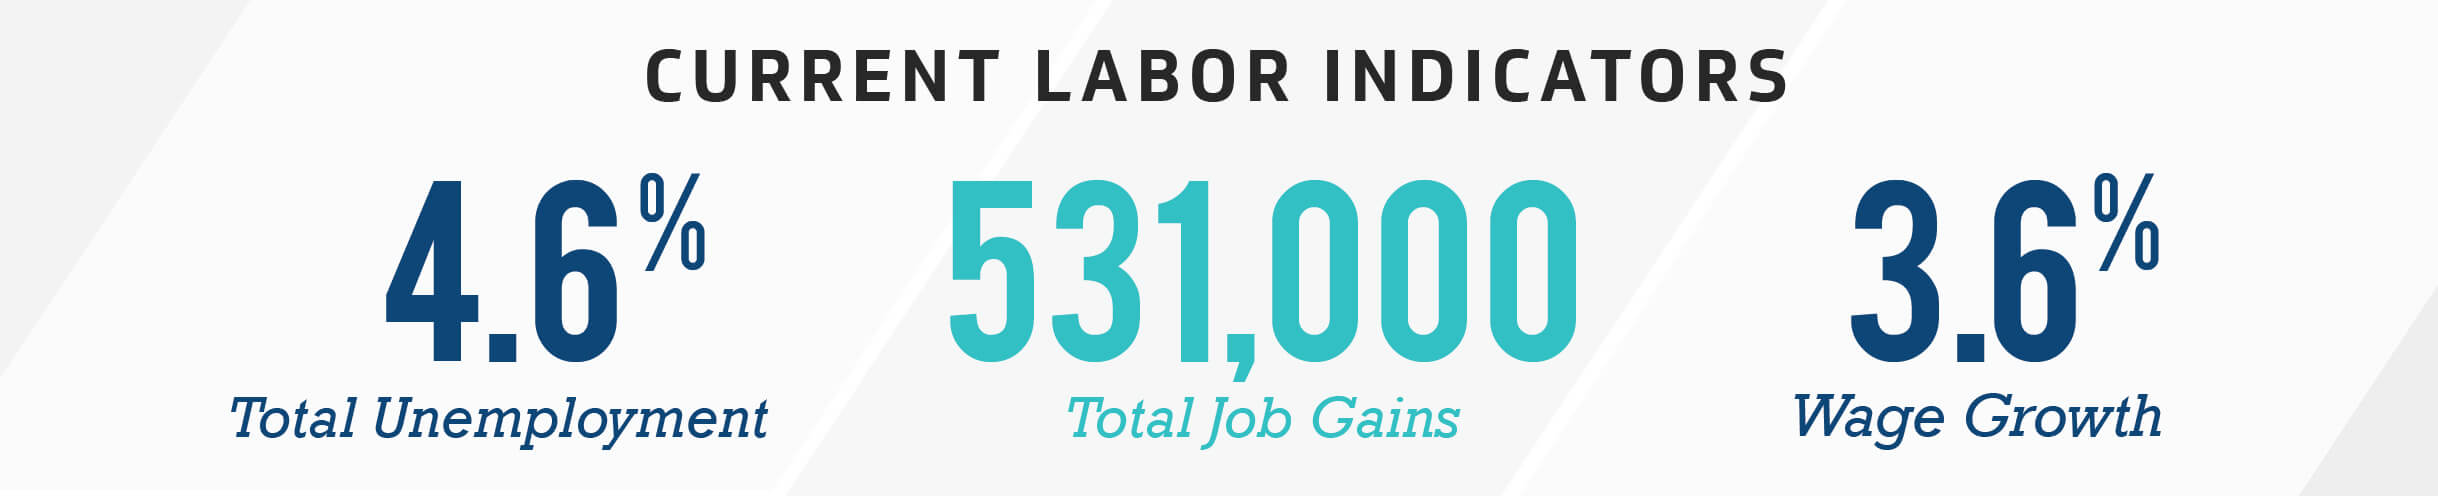 Current Labor Indicators - November 2021 - 4.6% Total Unemployment, 531,000 Total Job Gains, and 3.6% Wage Growth